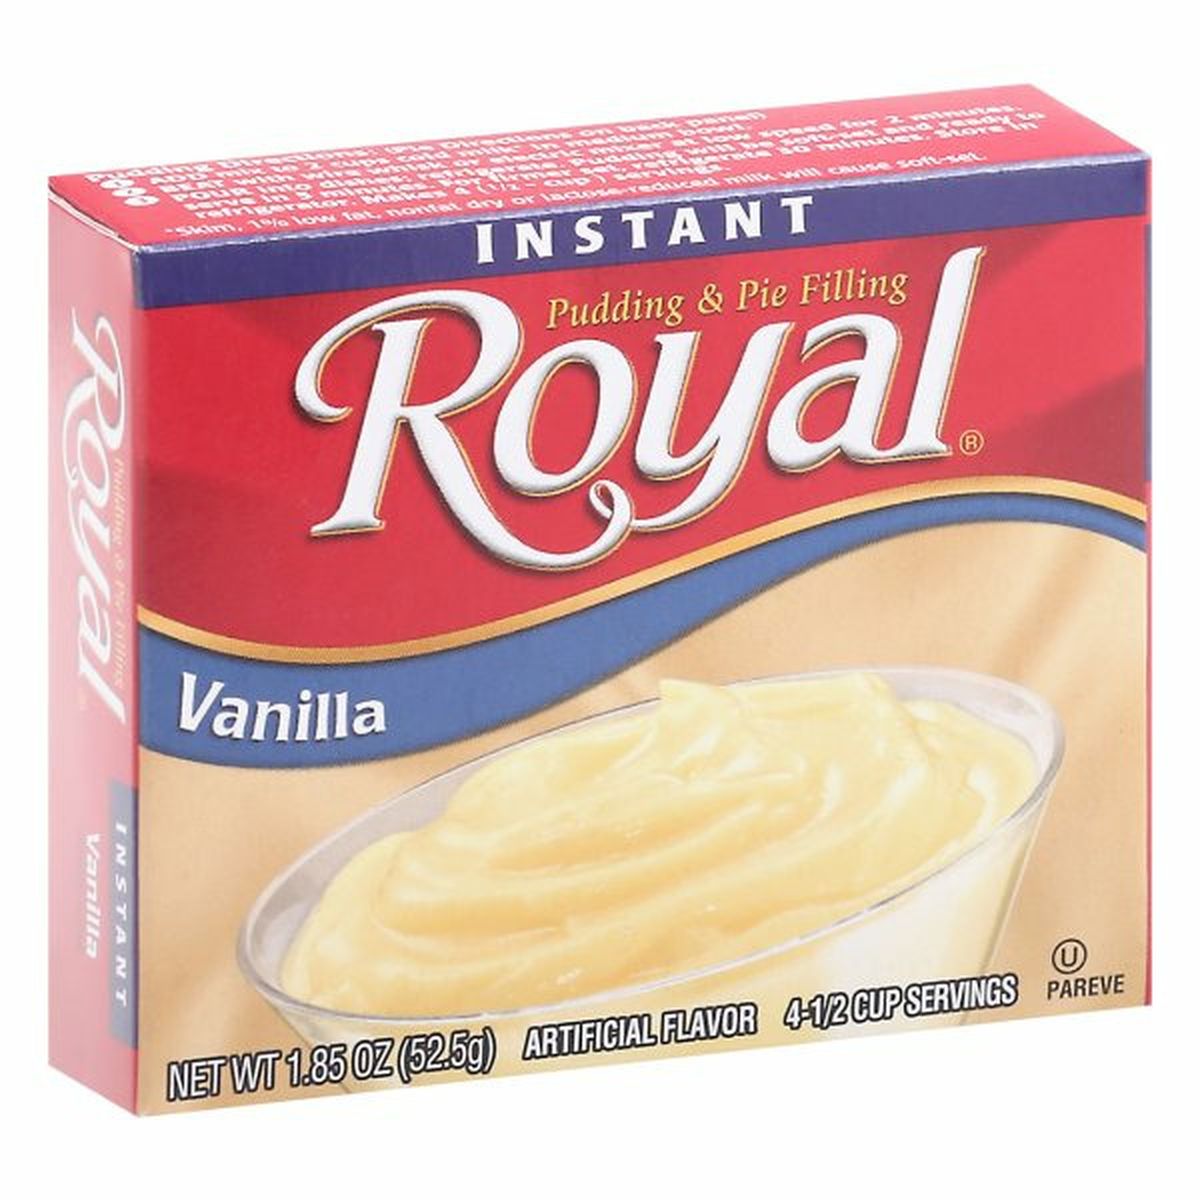 Calories in Royal Pudding & Pie Filling, Vanilla, Instant